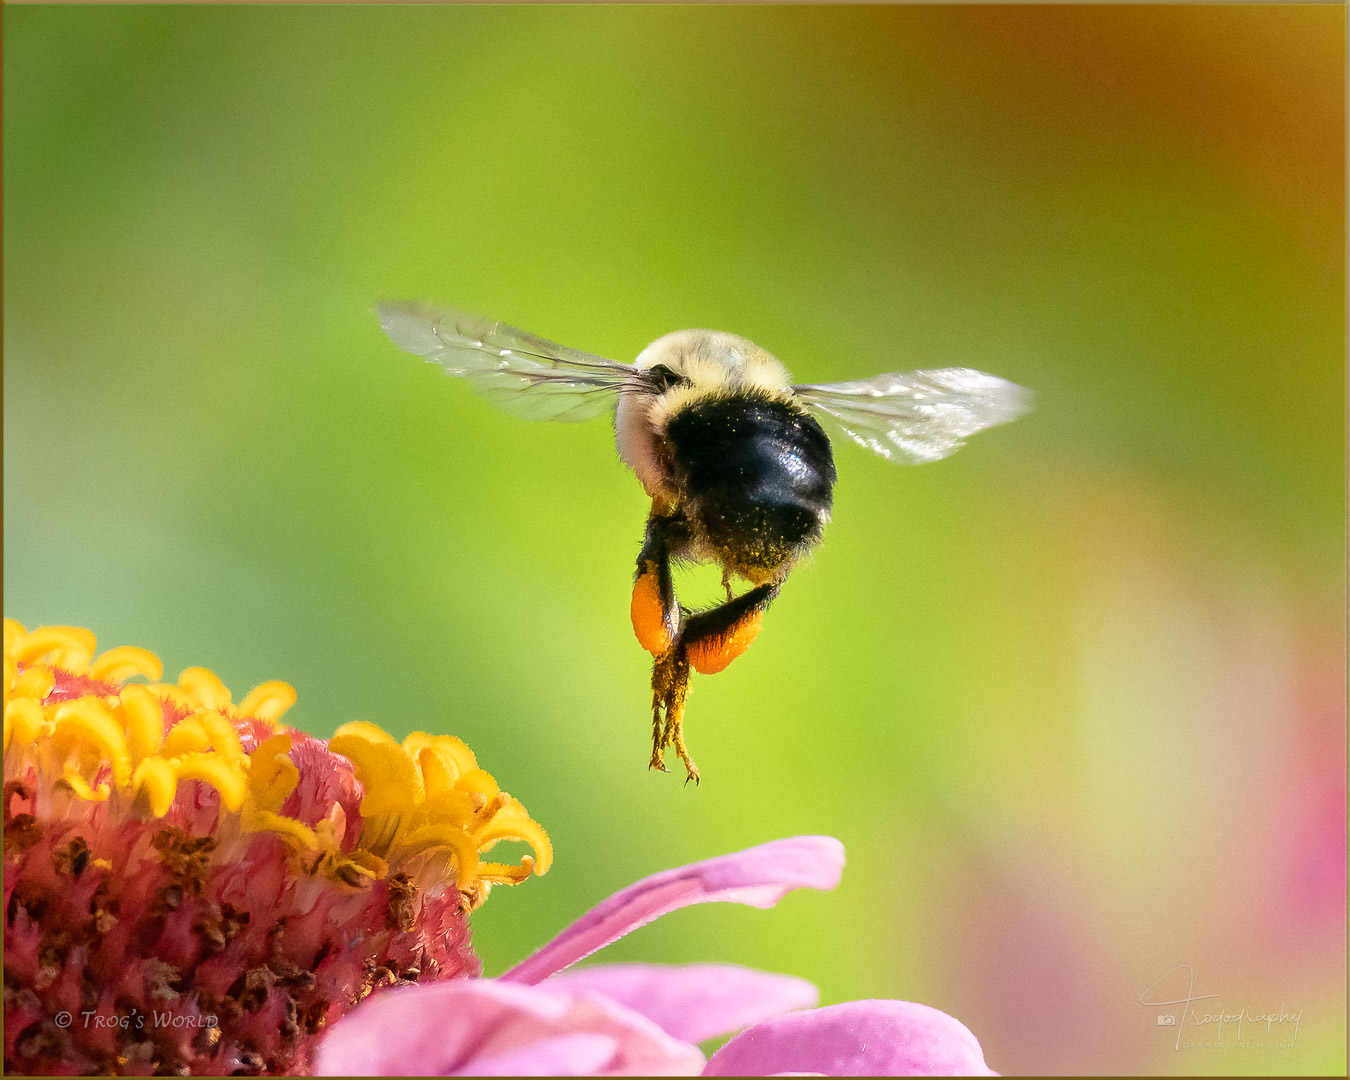 Bumblebee in flight with a pollen sac